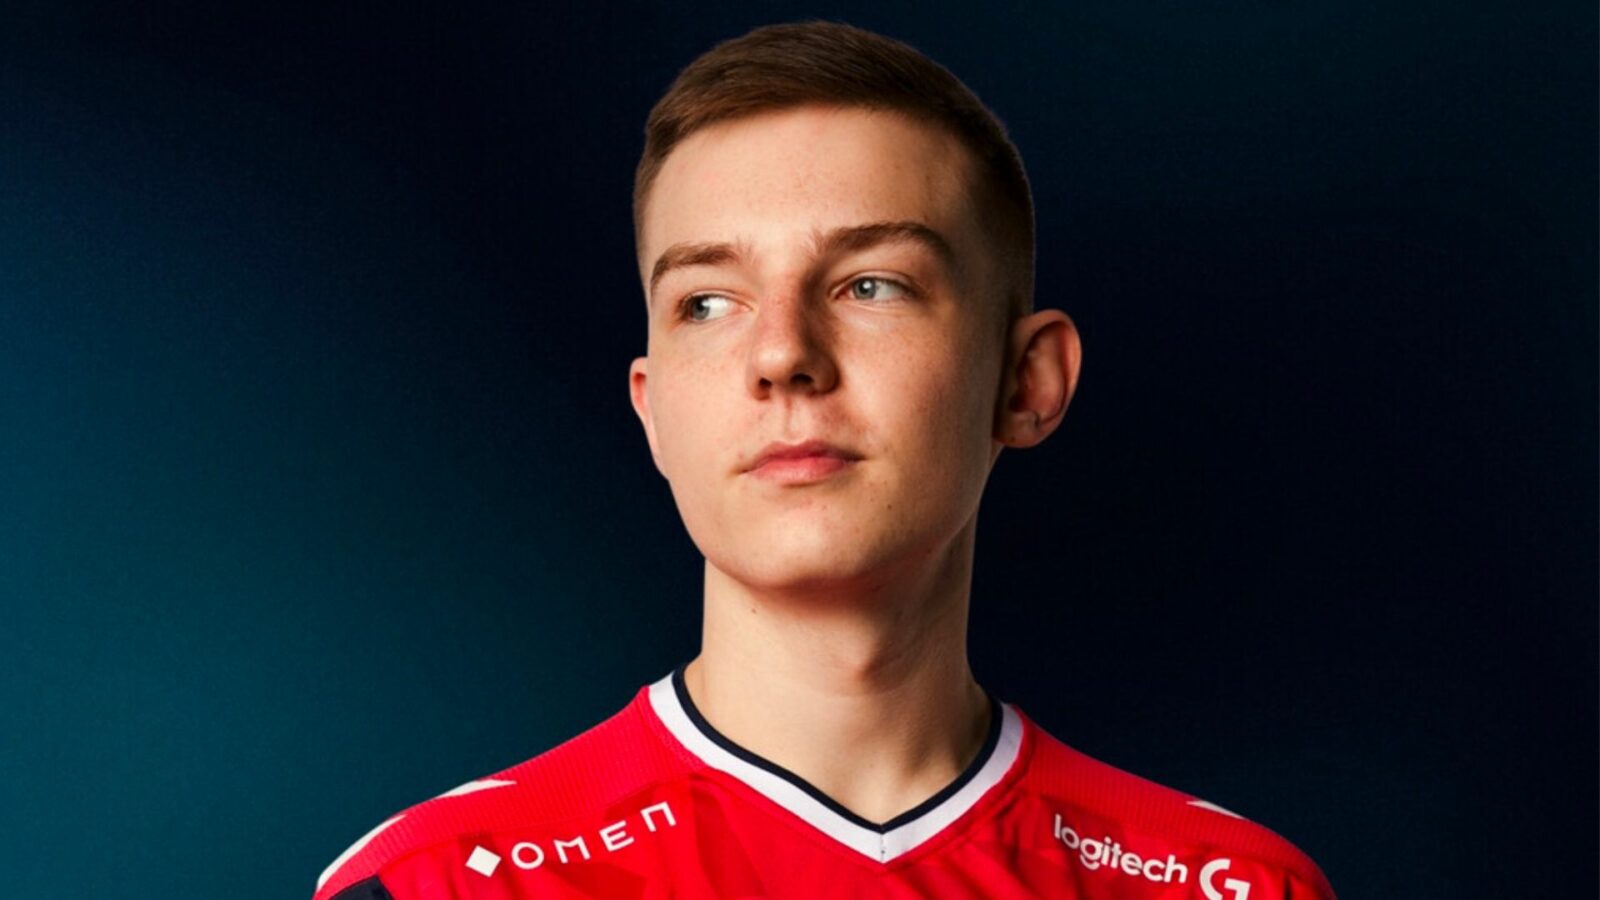 image for article: "Astralis’ dev1ce set to play first CSGO tournament after year-long break"